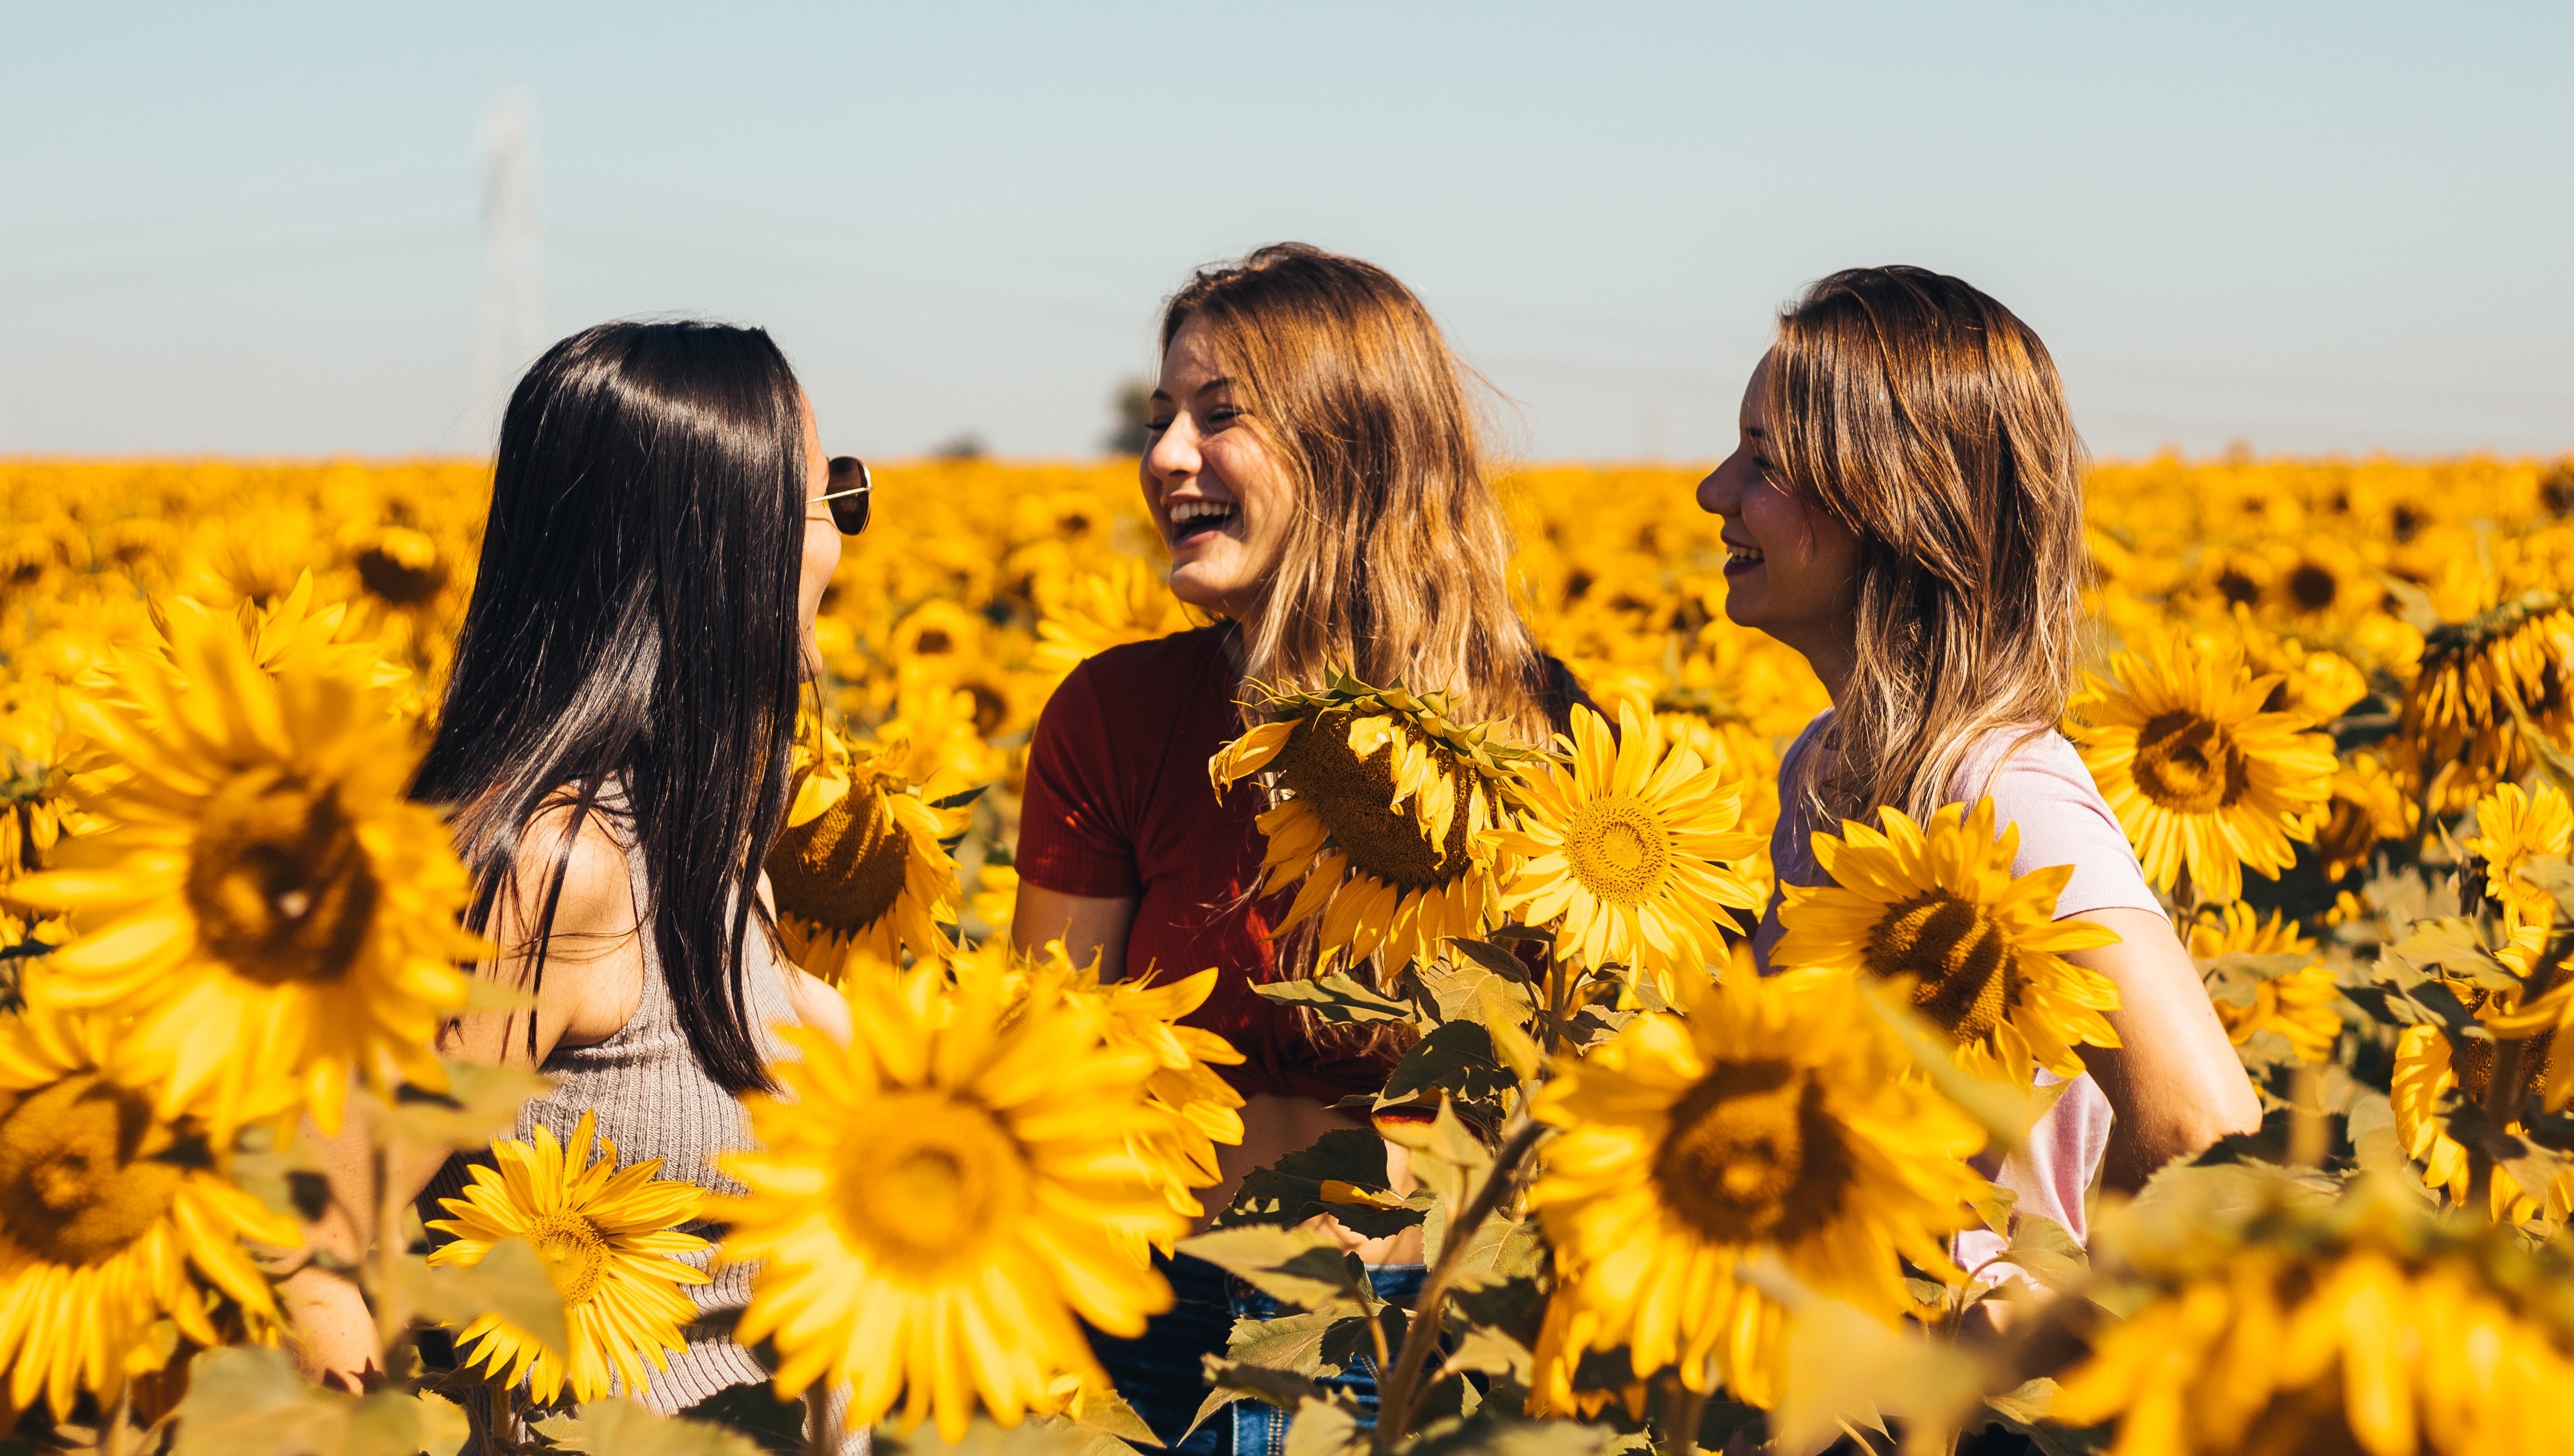 young women laughing in a sunflower field